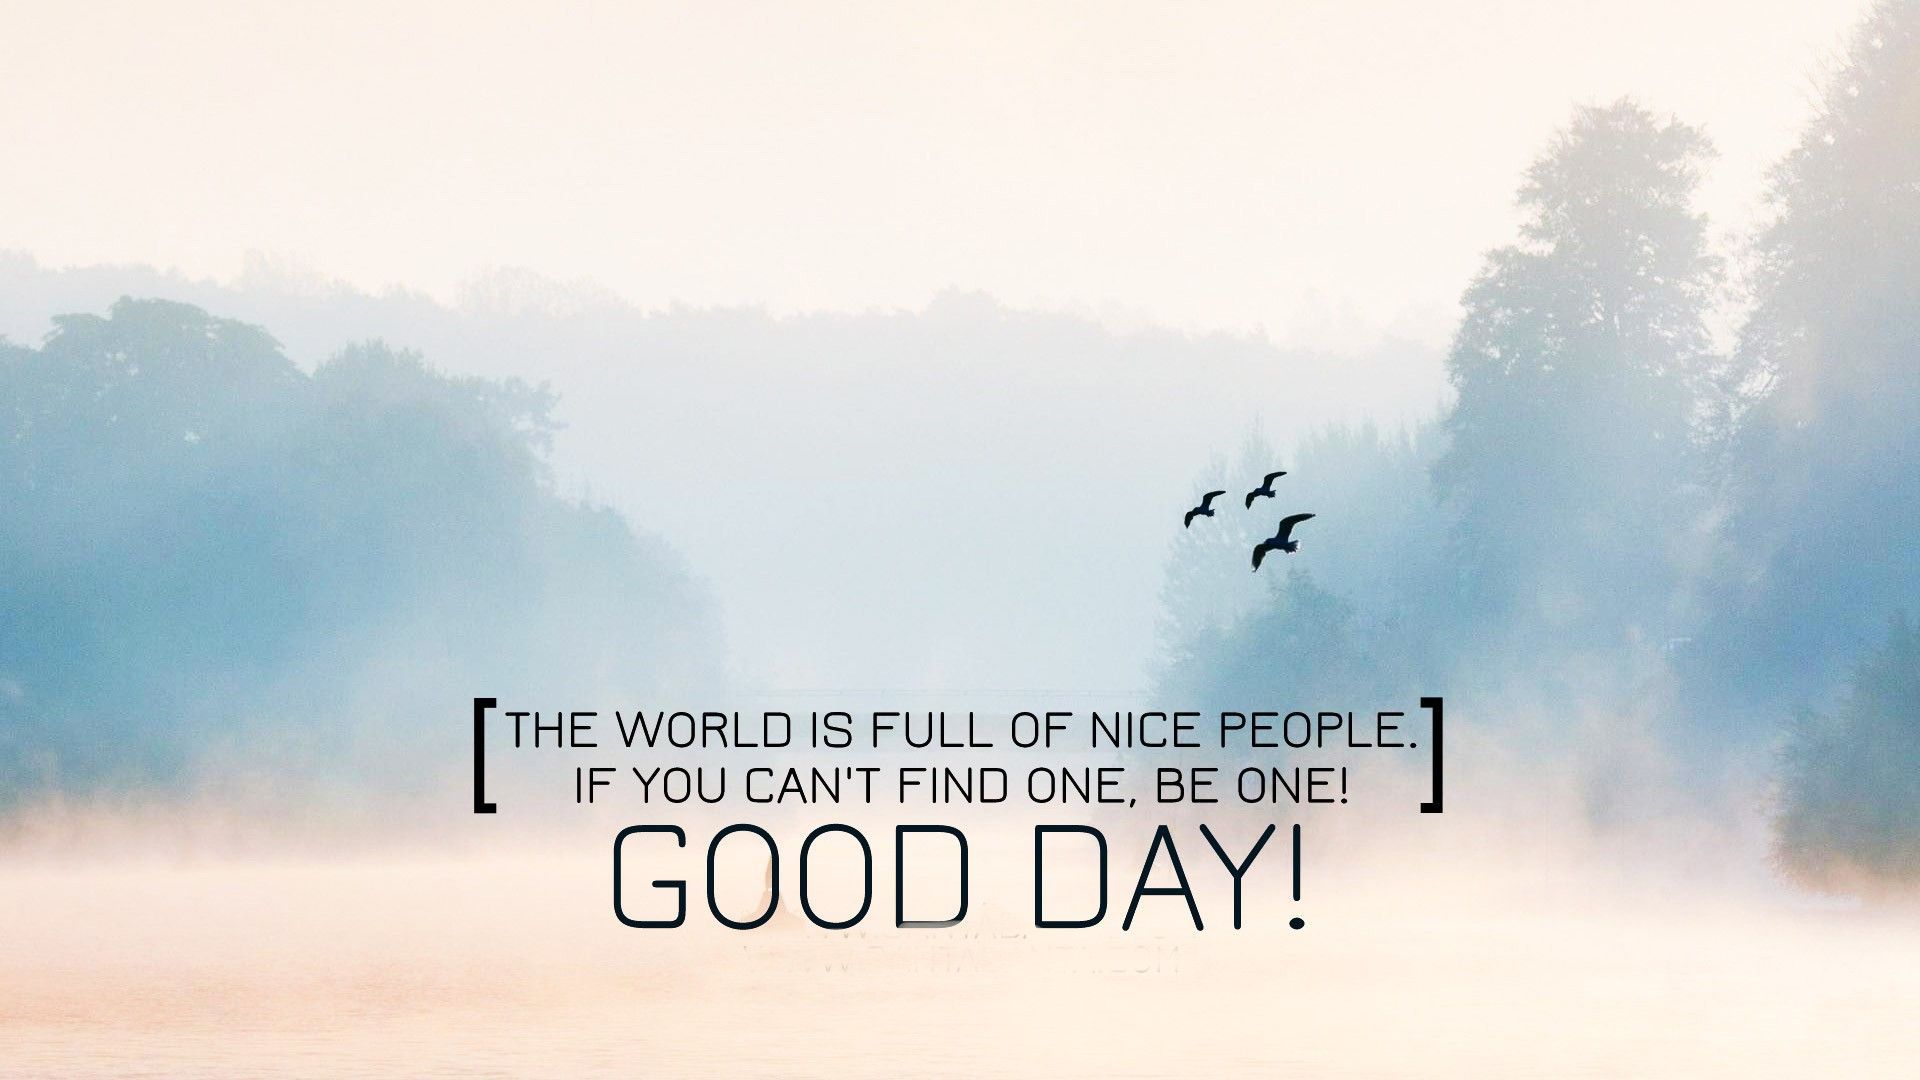 It'S A Good Day To Have A Good Day Wallpapers